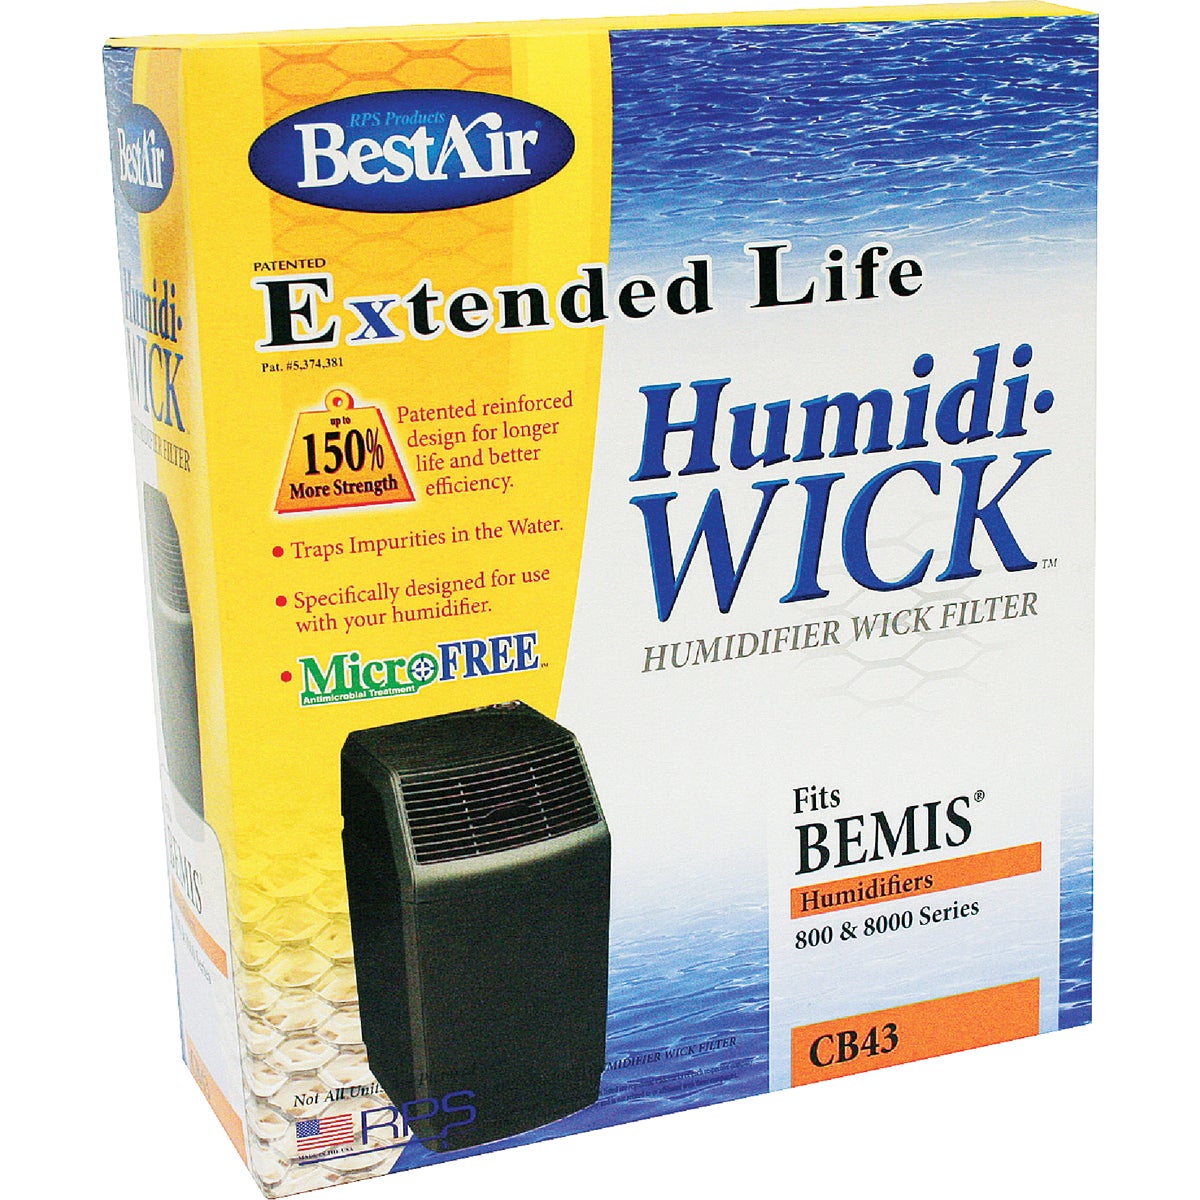 BestAir Extended Life Humidi-Wick CB43 Humidifier Wick Filter